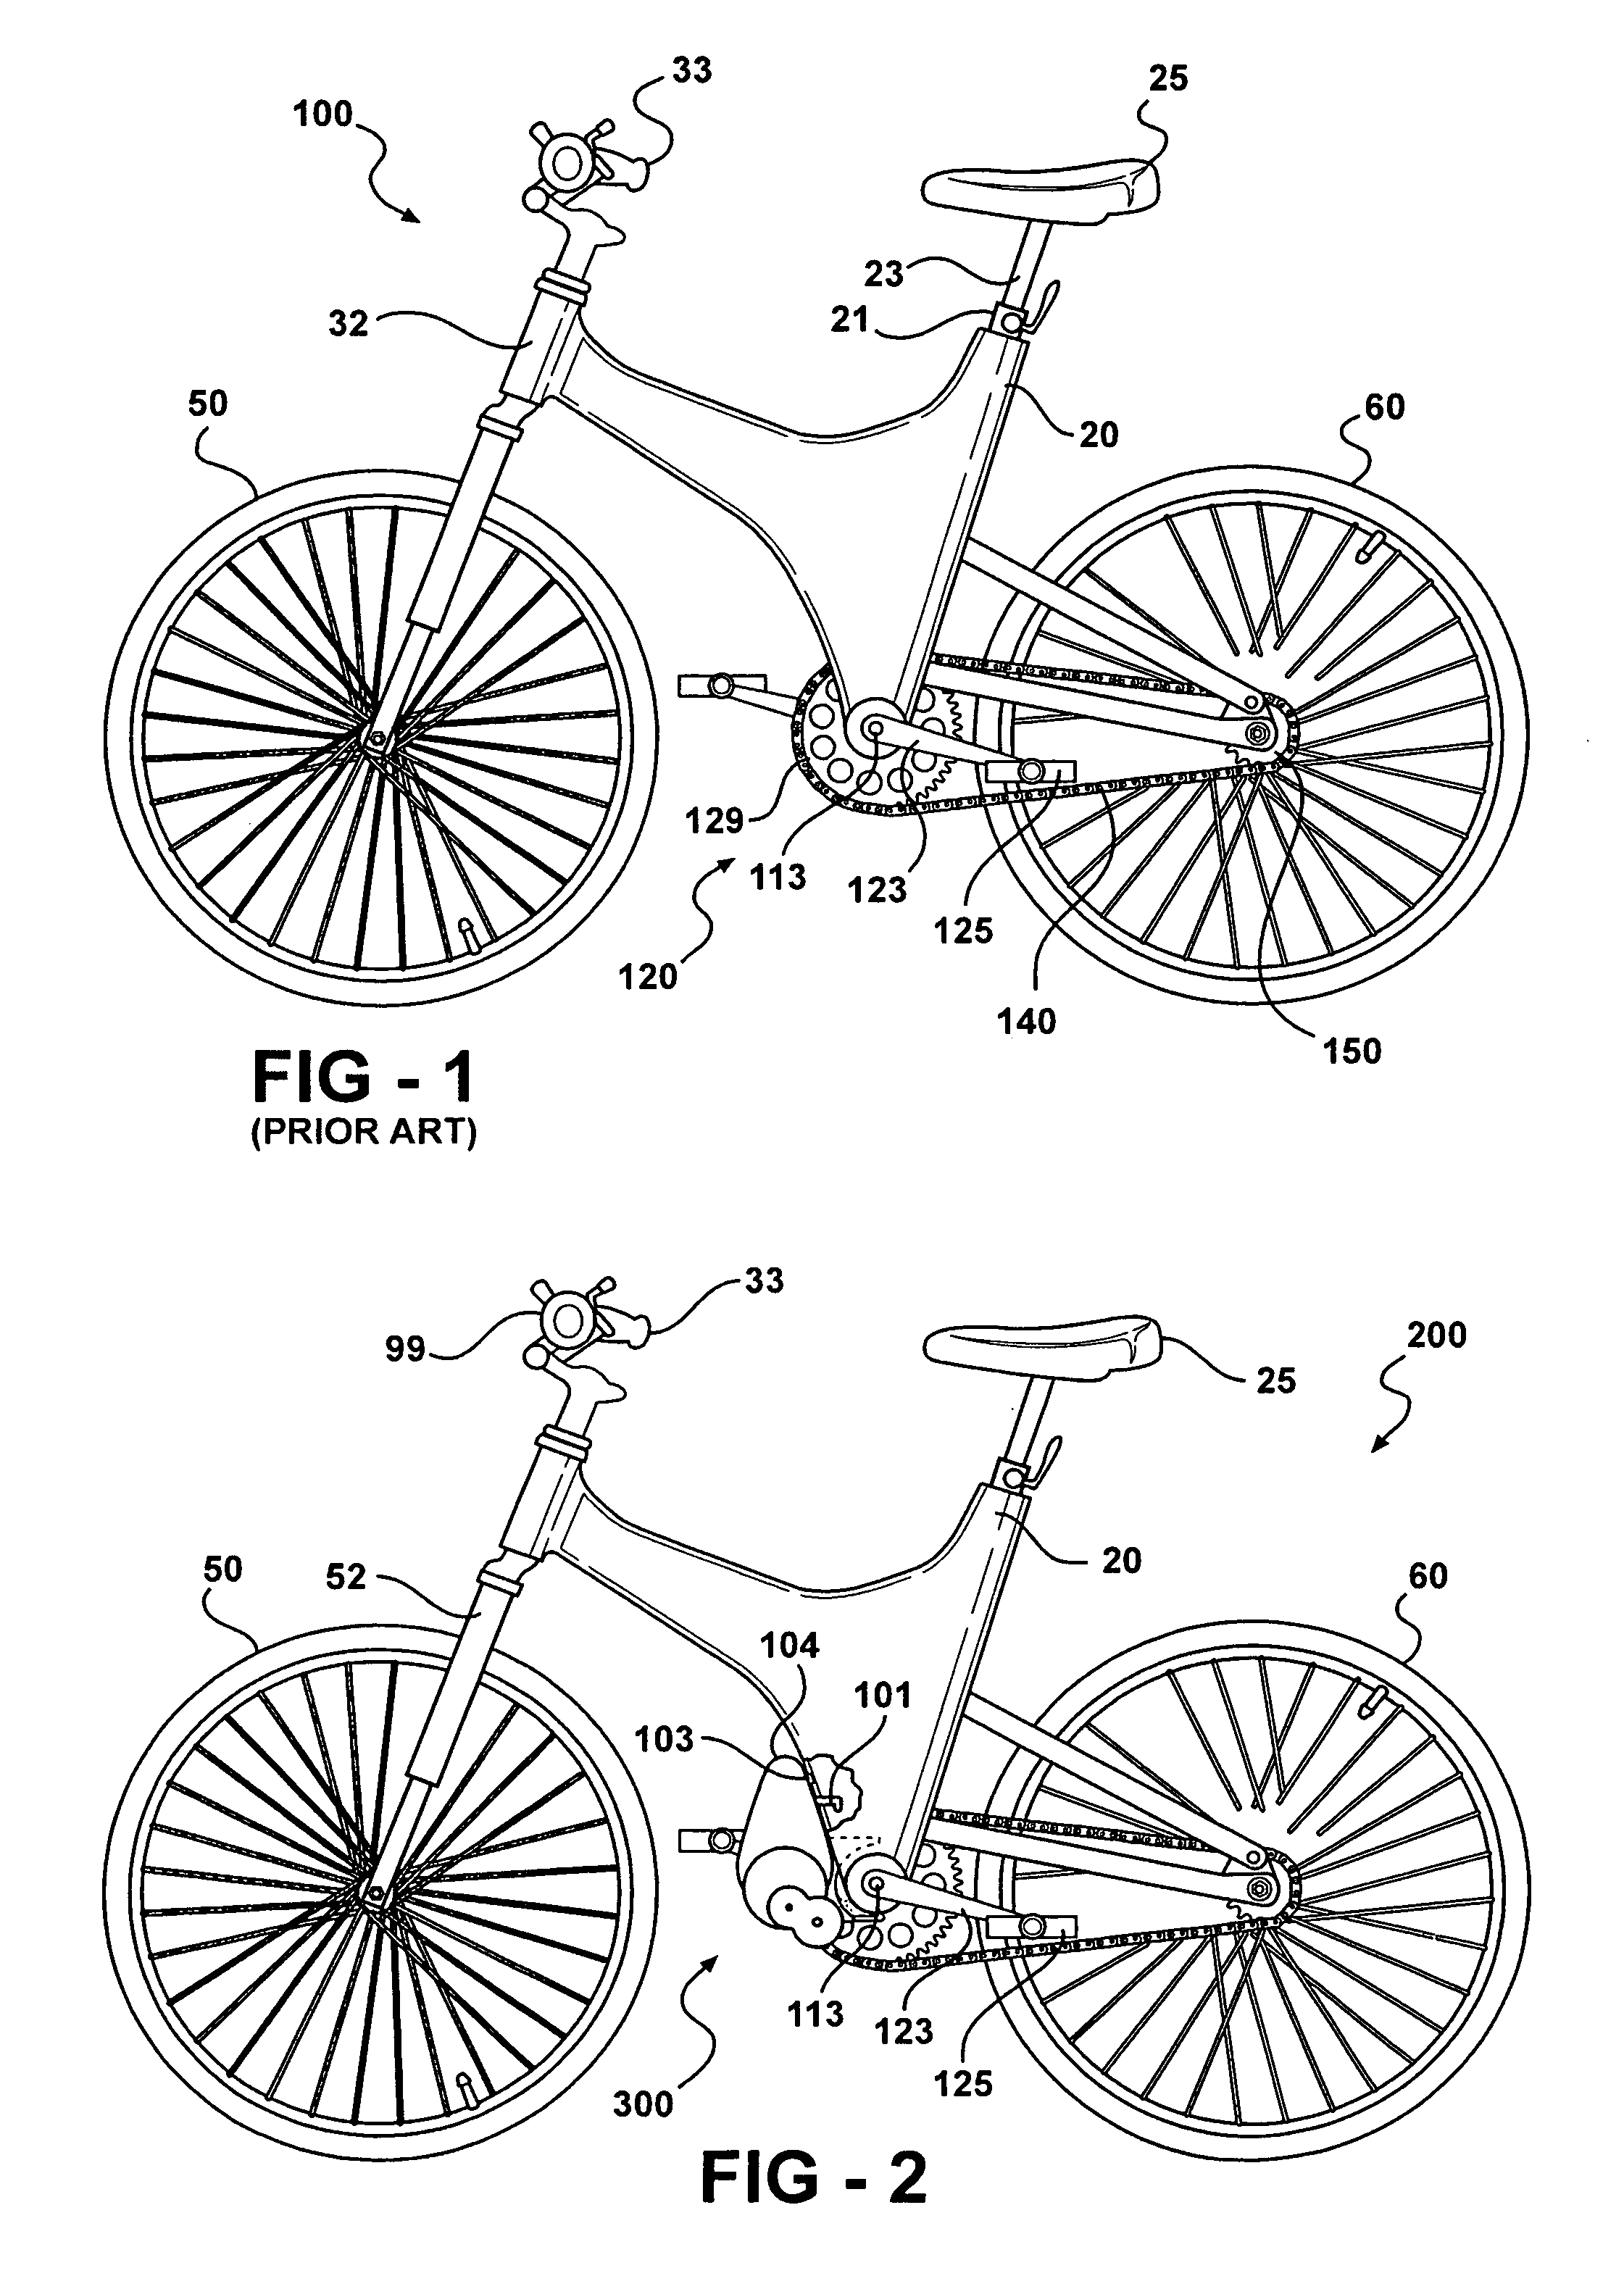 Bicycle having a removable power assist module